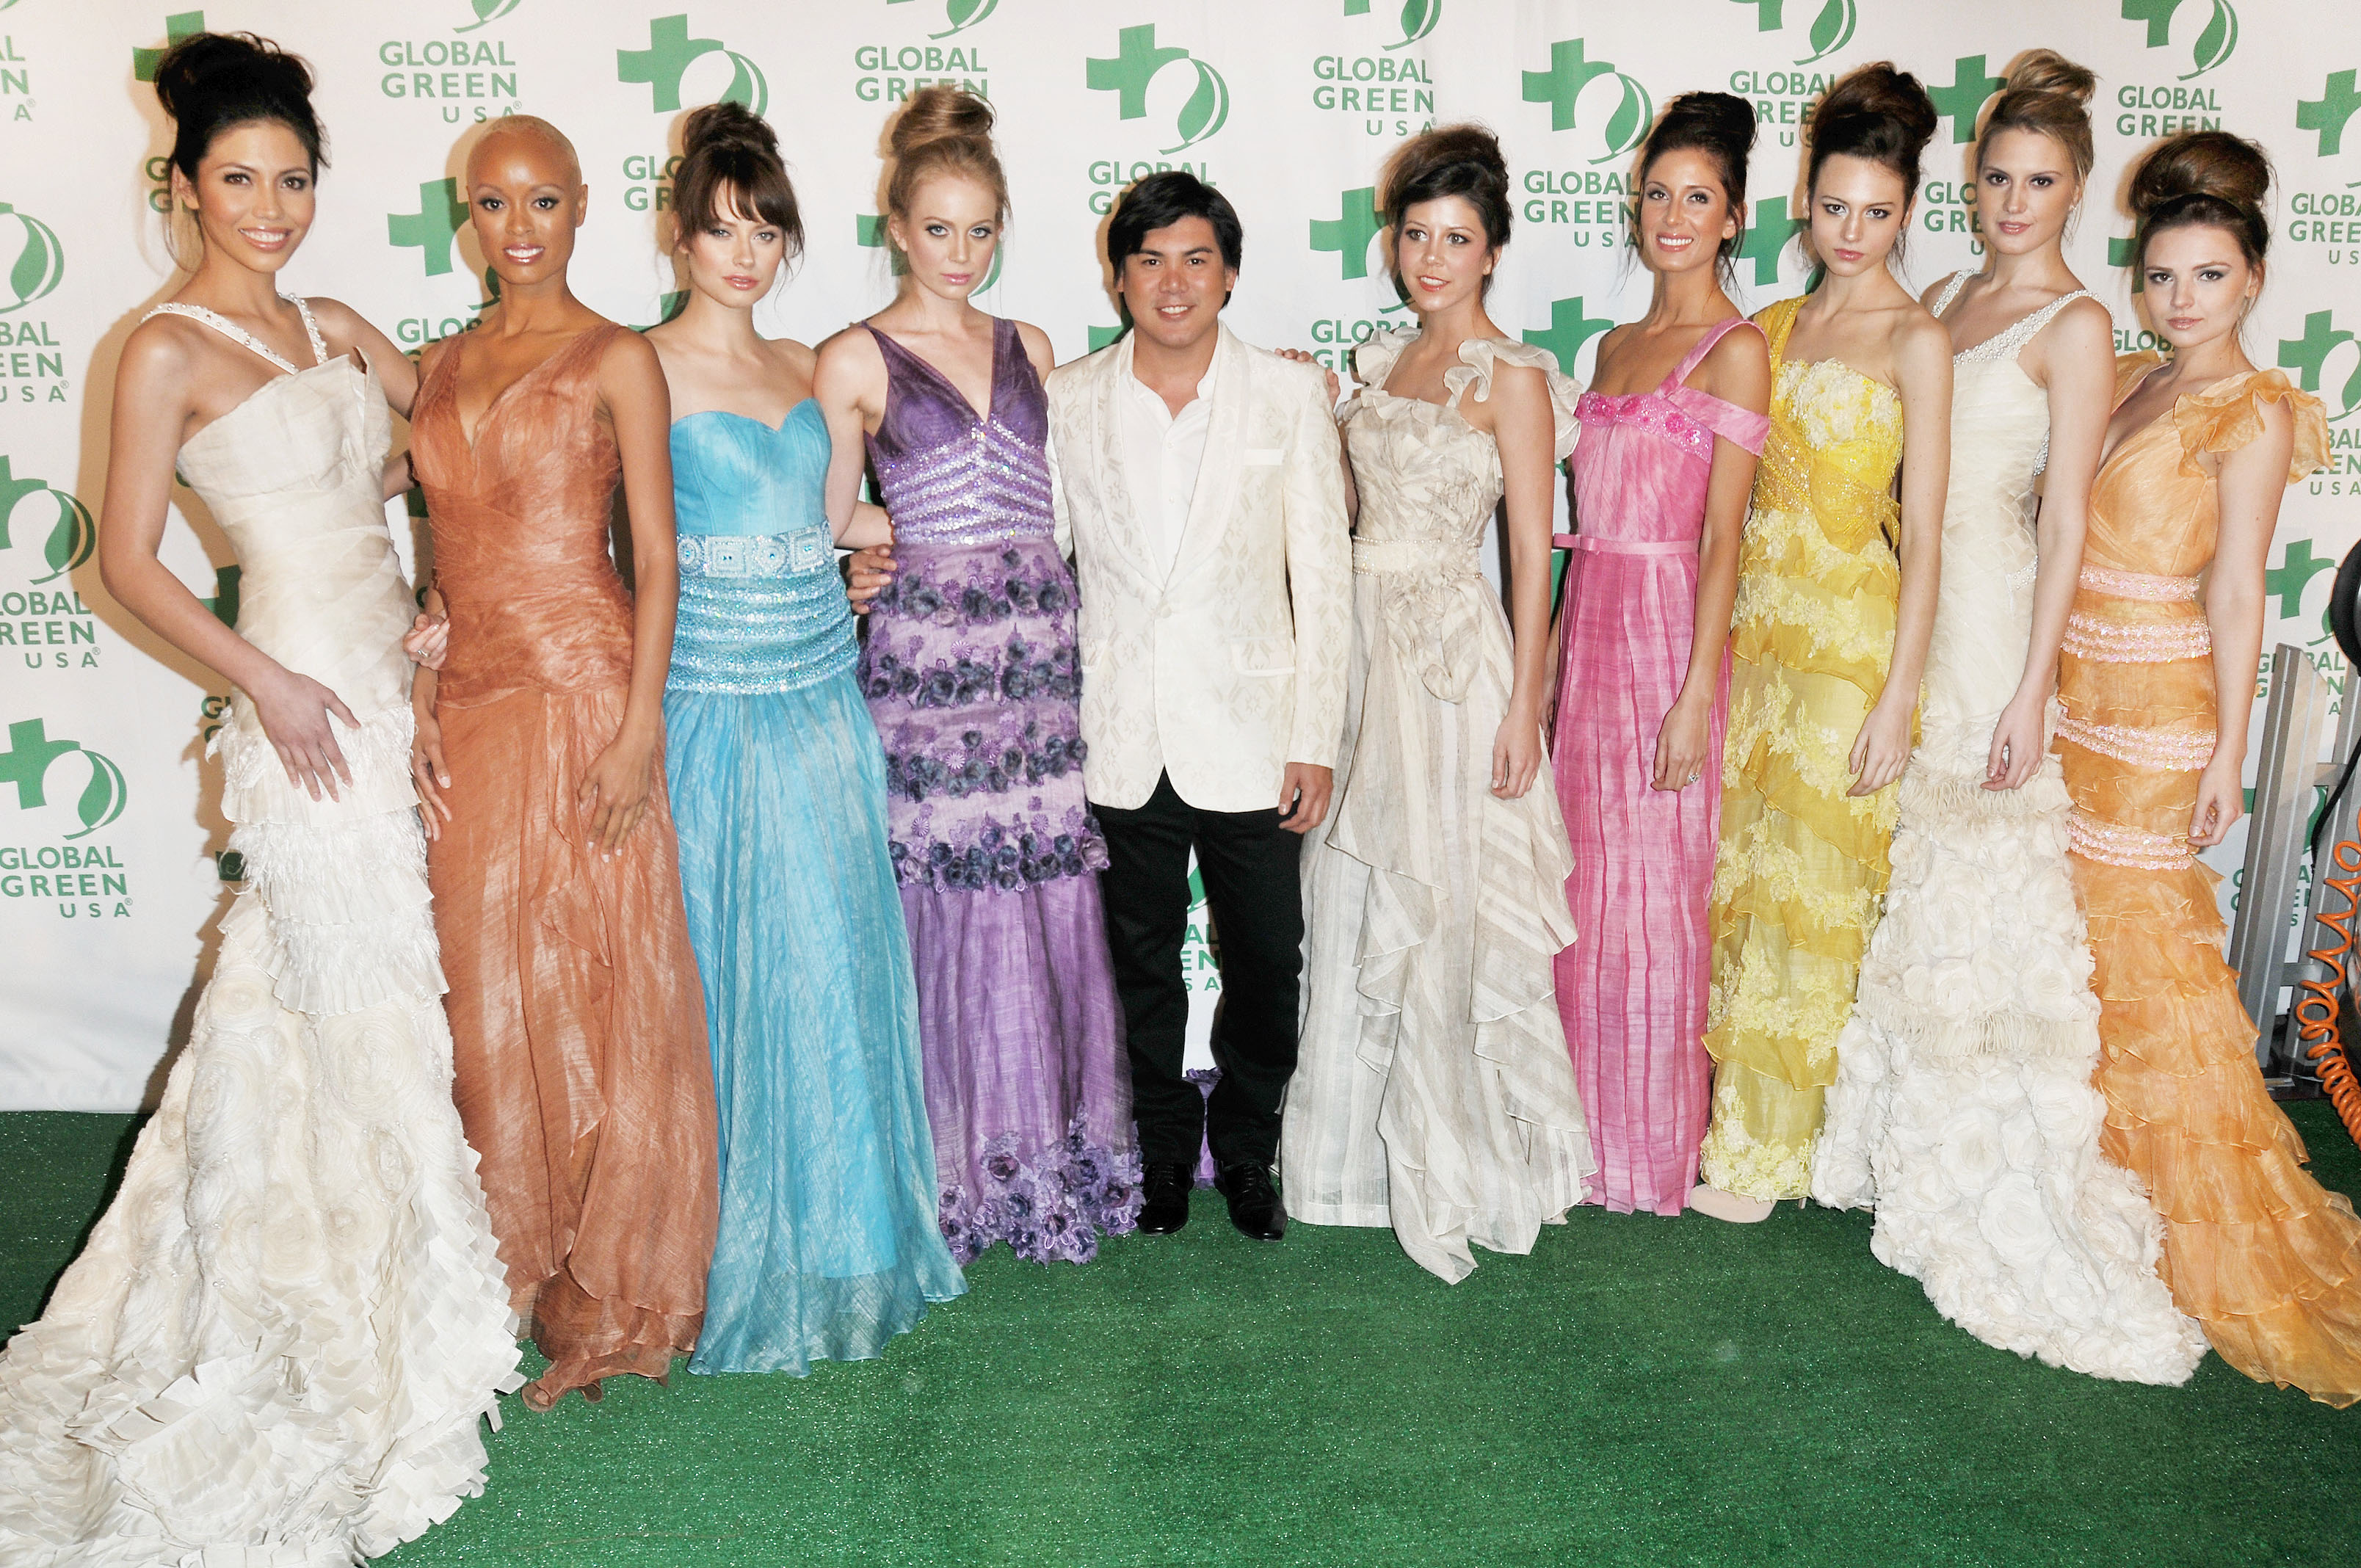 Oliver Tolentino at the Global Green Annual Pre-Oscar party with his models